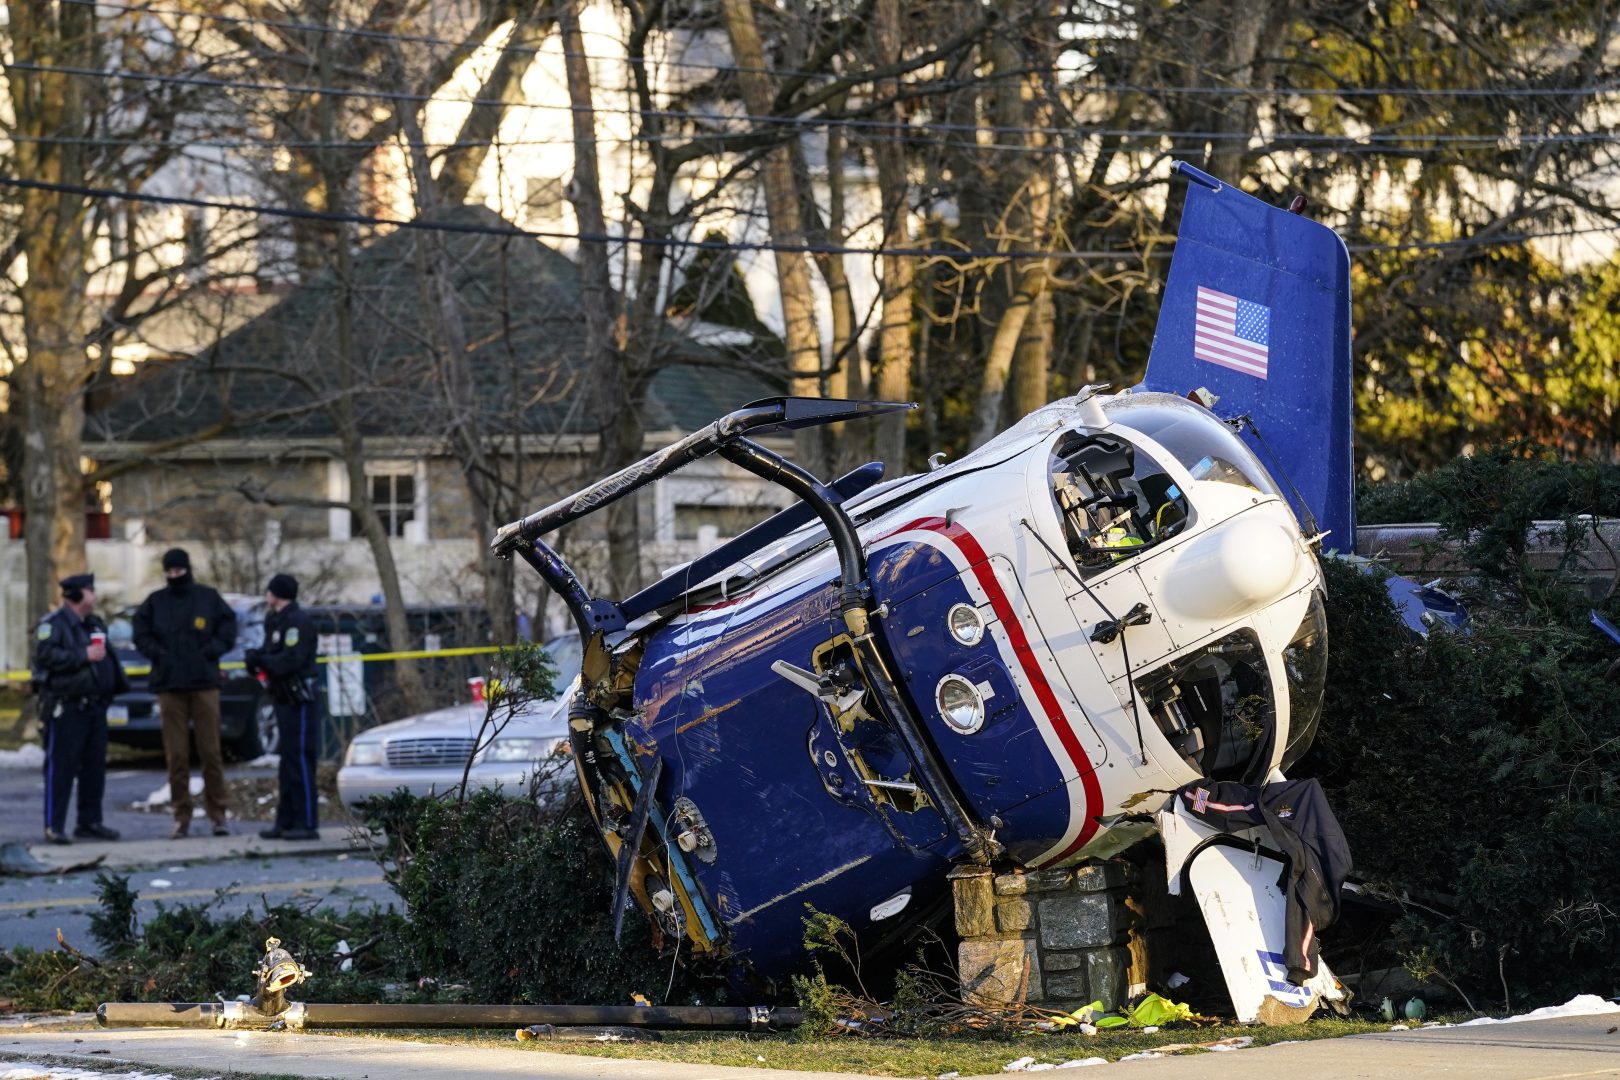 A medical helicopter rests next to the Drexel Hill United Methodist Church after it crashed in the Drexel Hill section of Upper Darby, Pa., on Tuesday, Jan. 11, 2022. 